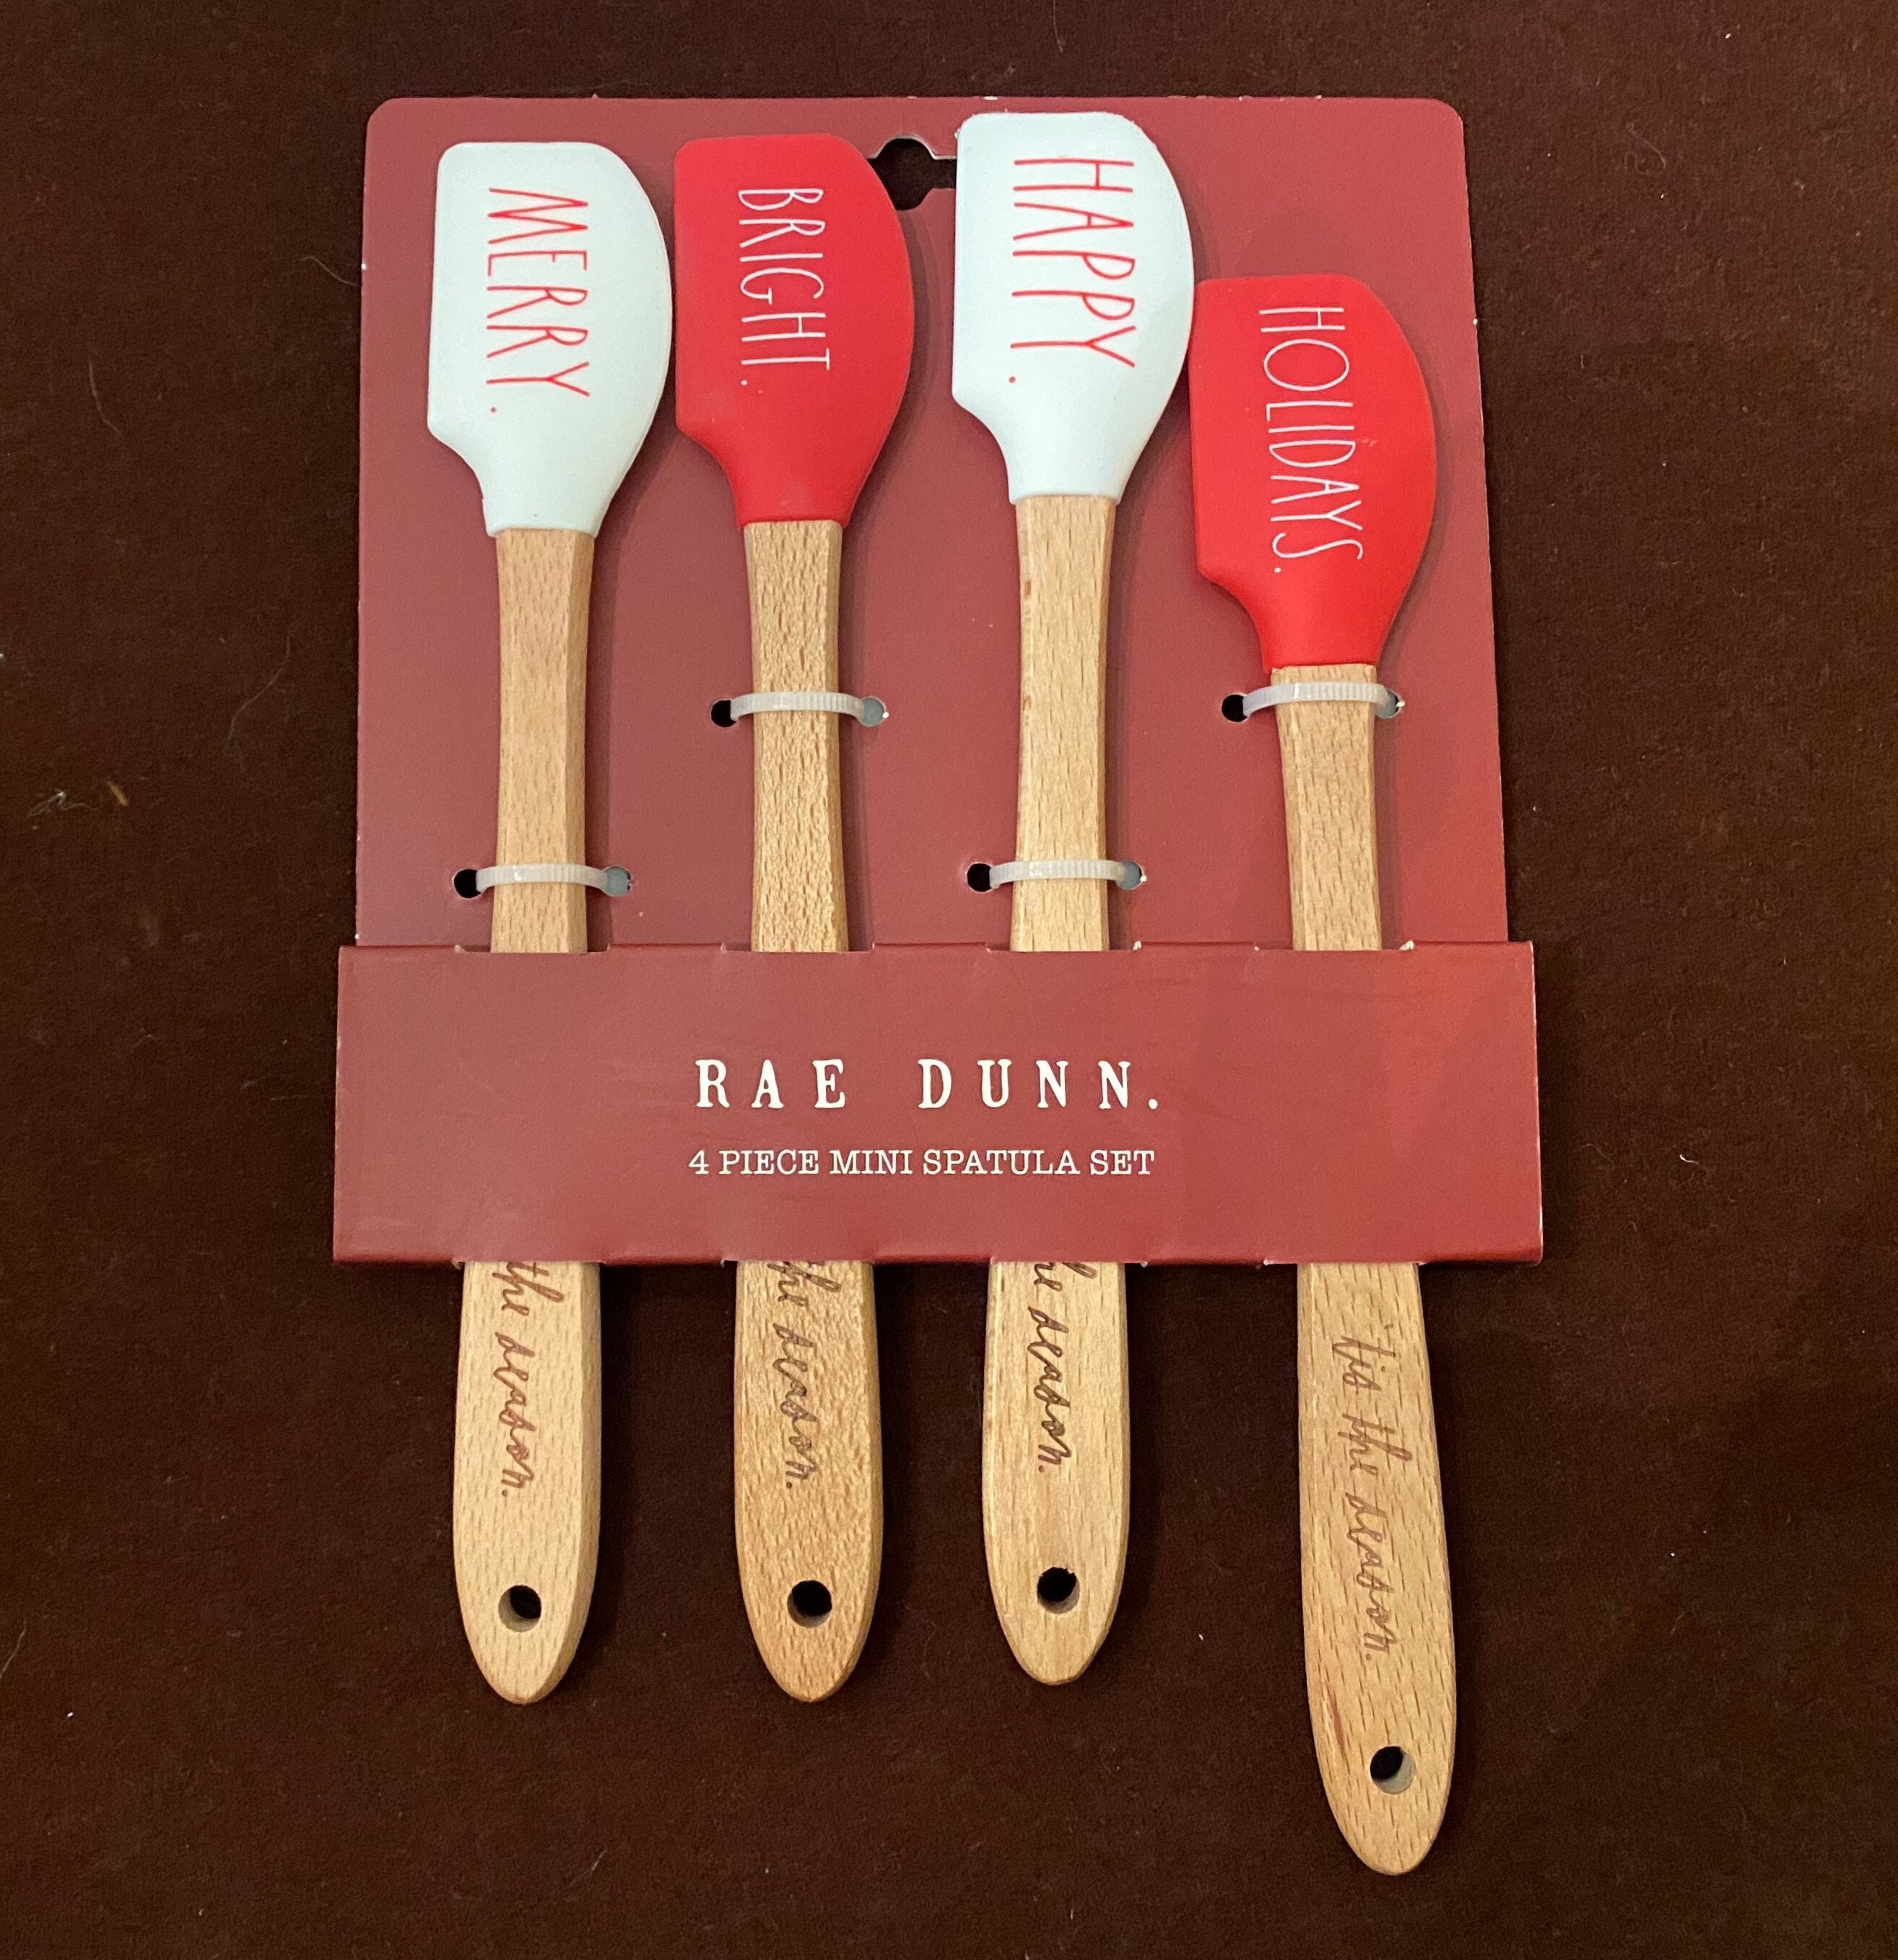 Rae Dunn Mini Silicone Kitchen Utensils Sets, Spatulas and Cooking  Utensils, 8 Piece Set